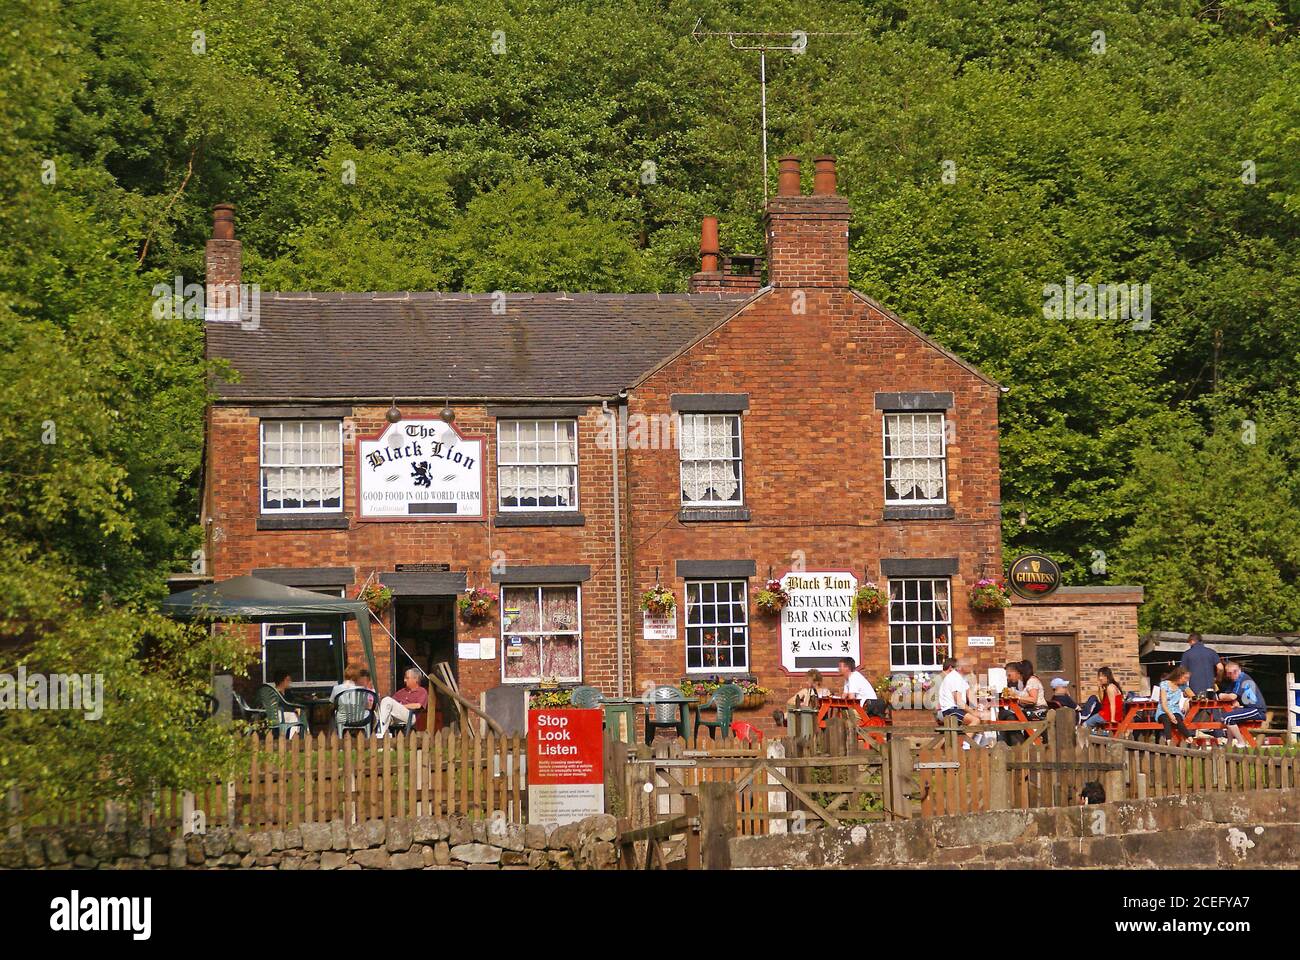 The Black Lion public house at Consall Forge in the Churnet Valley, Staffordshire. Stock Photo